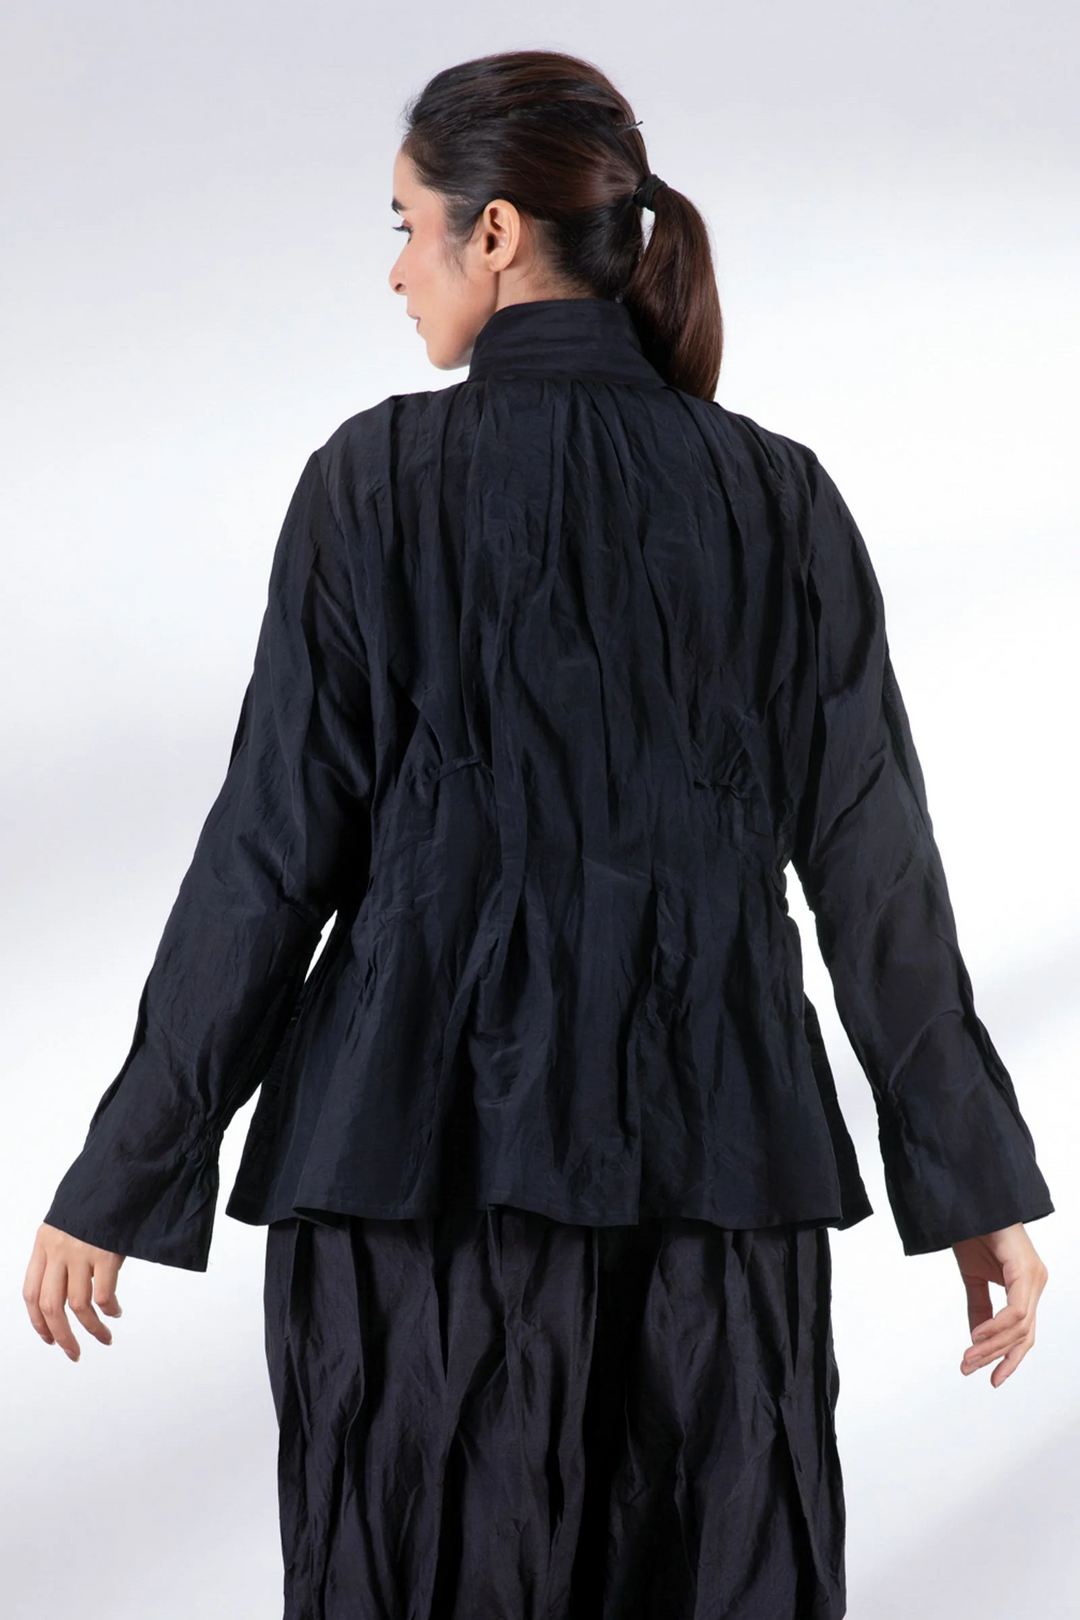 DYED COTTON SILK HEAVY VOILE WAVY TUCKED SHIRT - dh1541-blk -